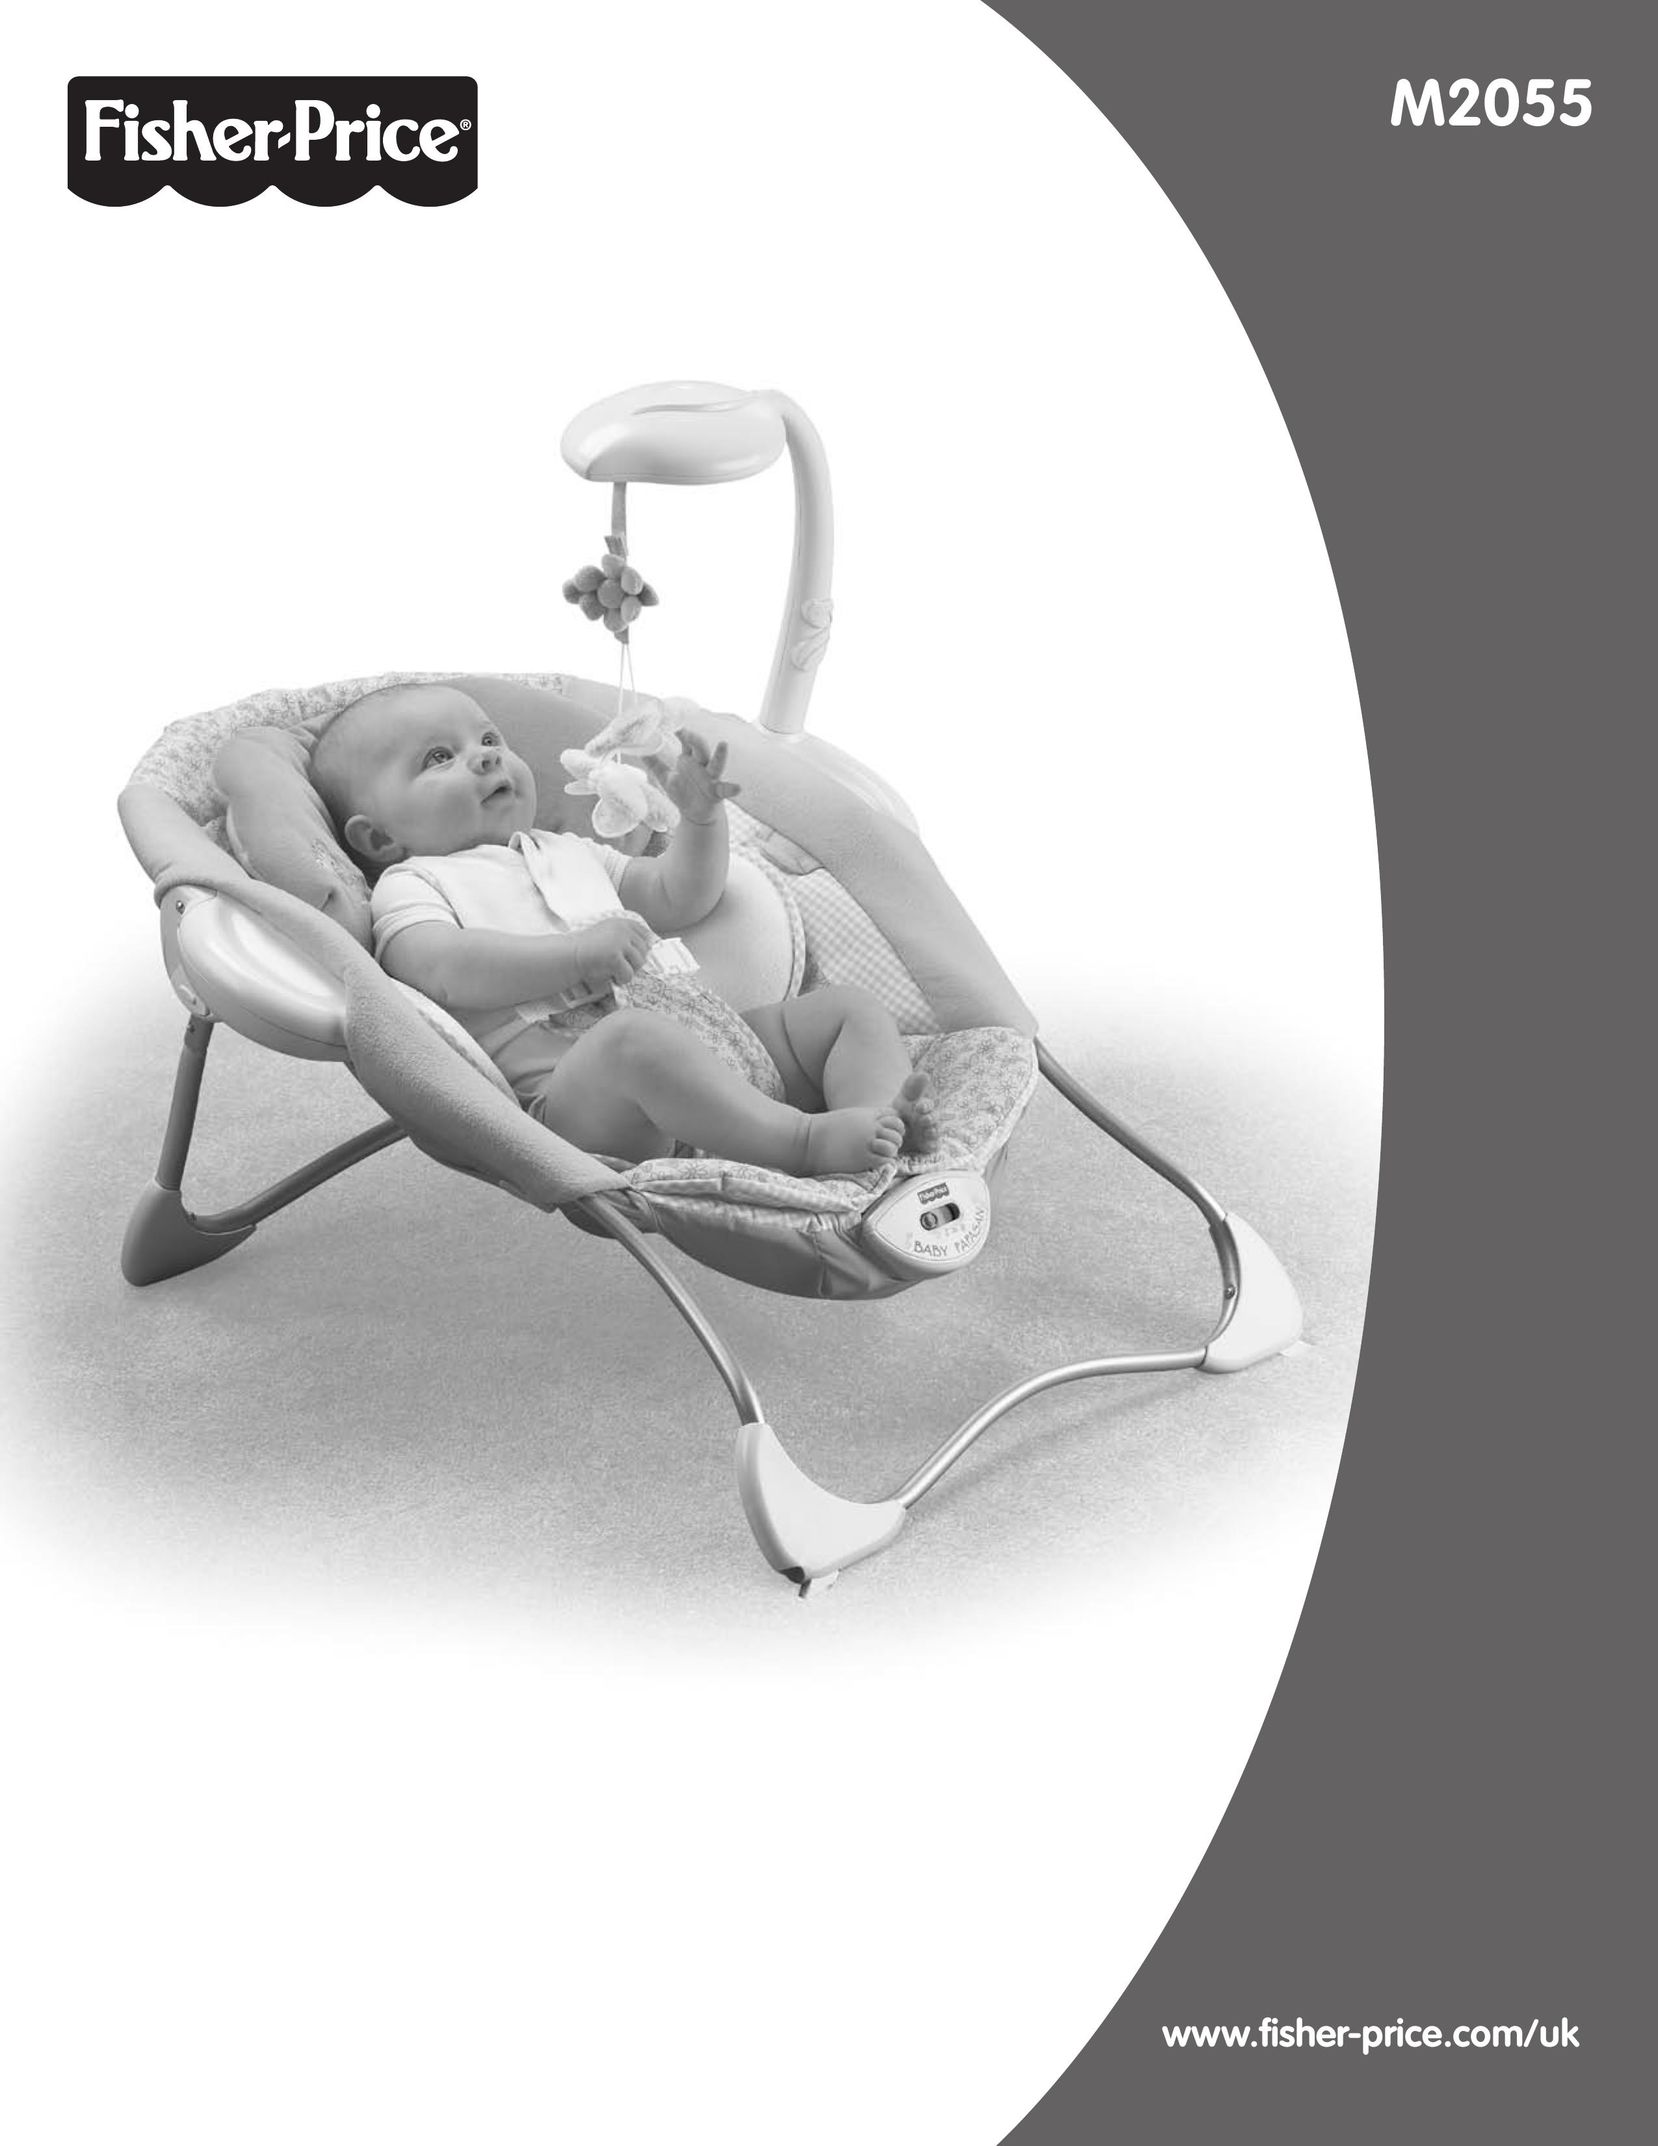 Fisher-Price M2055 Bouncy Seat User Manual